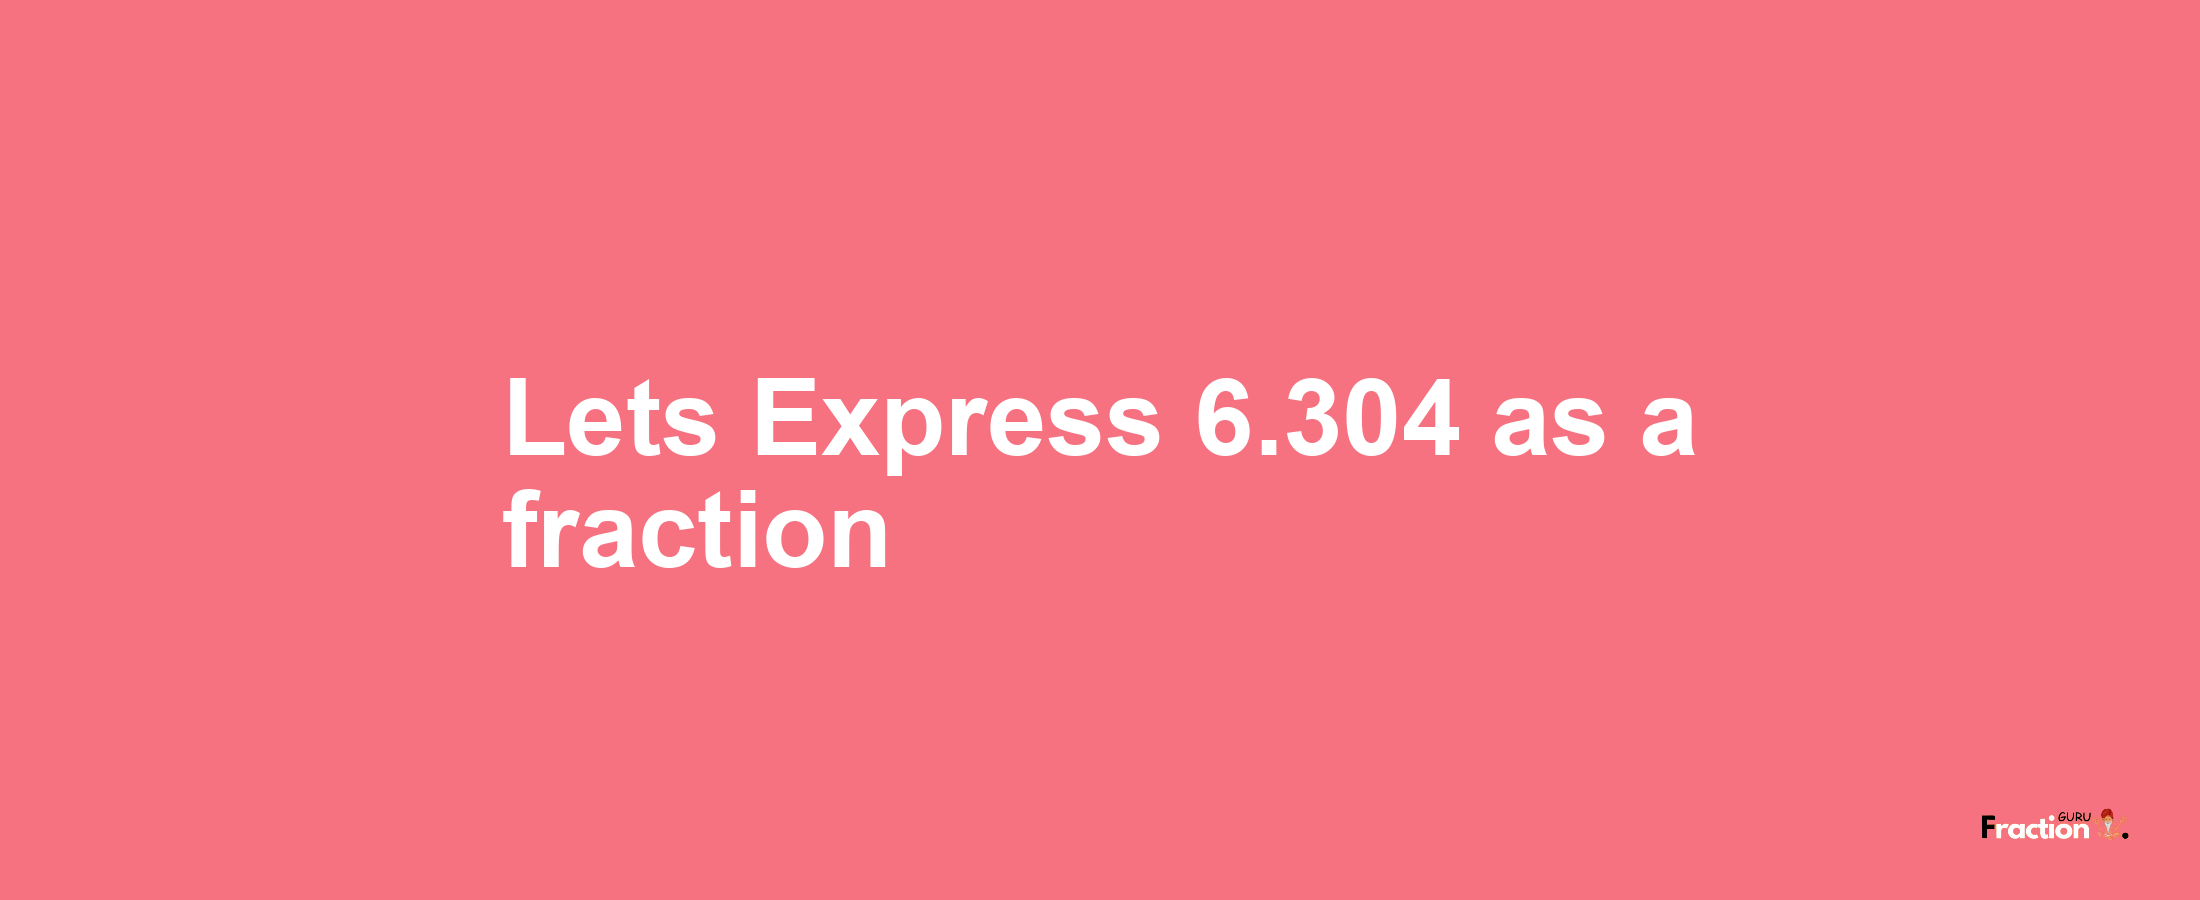 Lets Express 6.304 as afraction